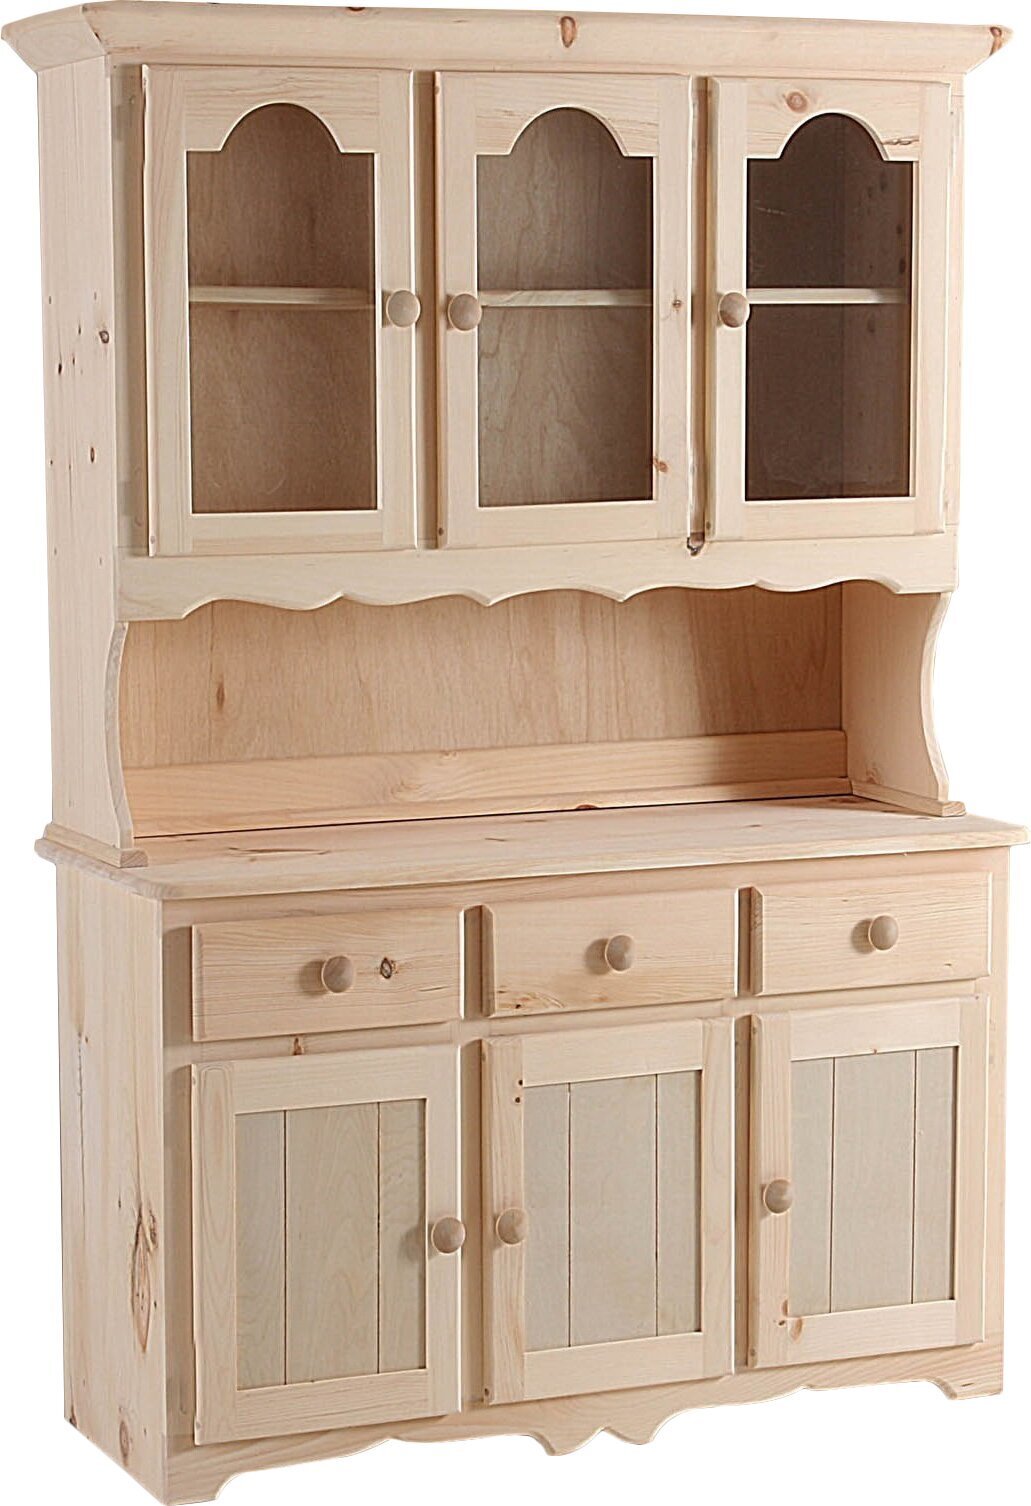 Rustic Country Hutch Cabinet